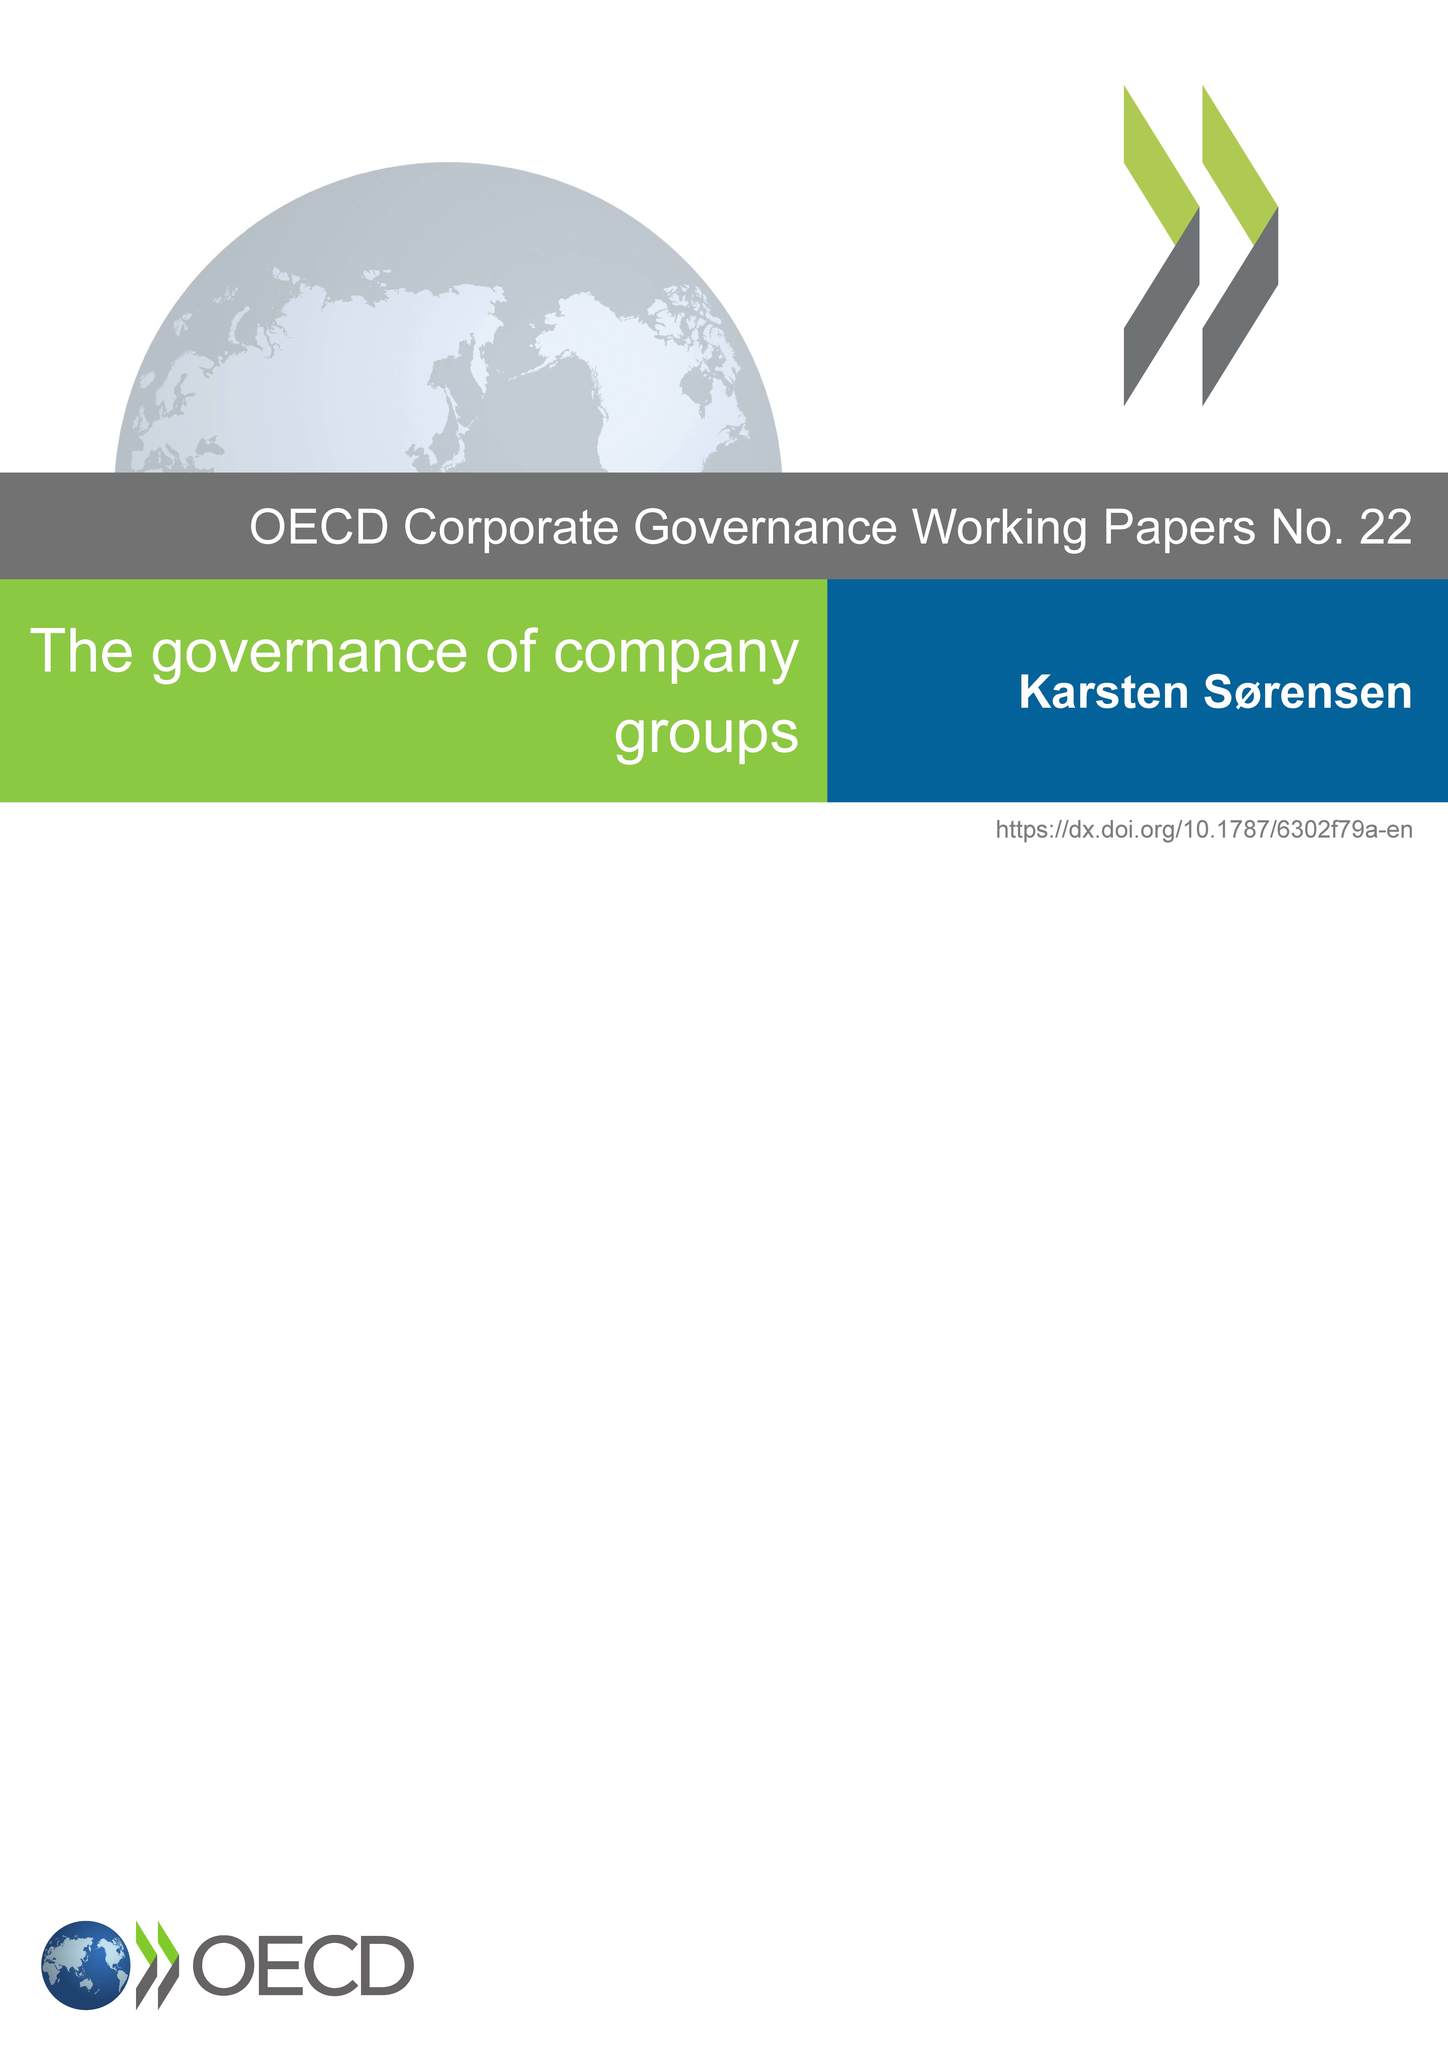 The Governance of company groups